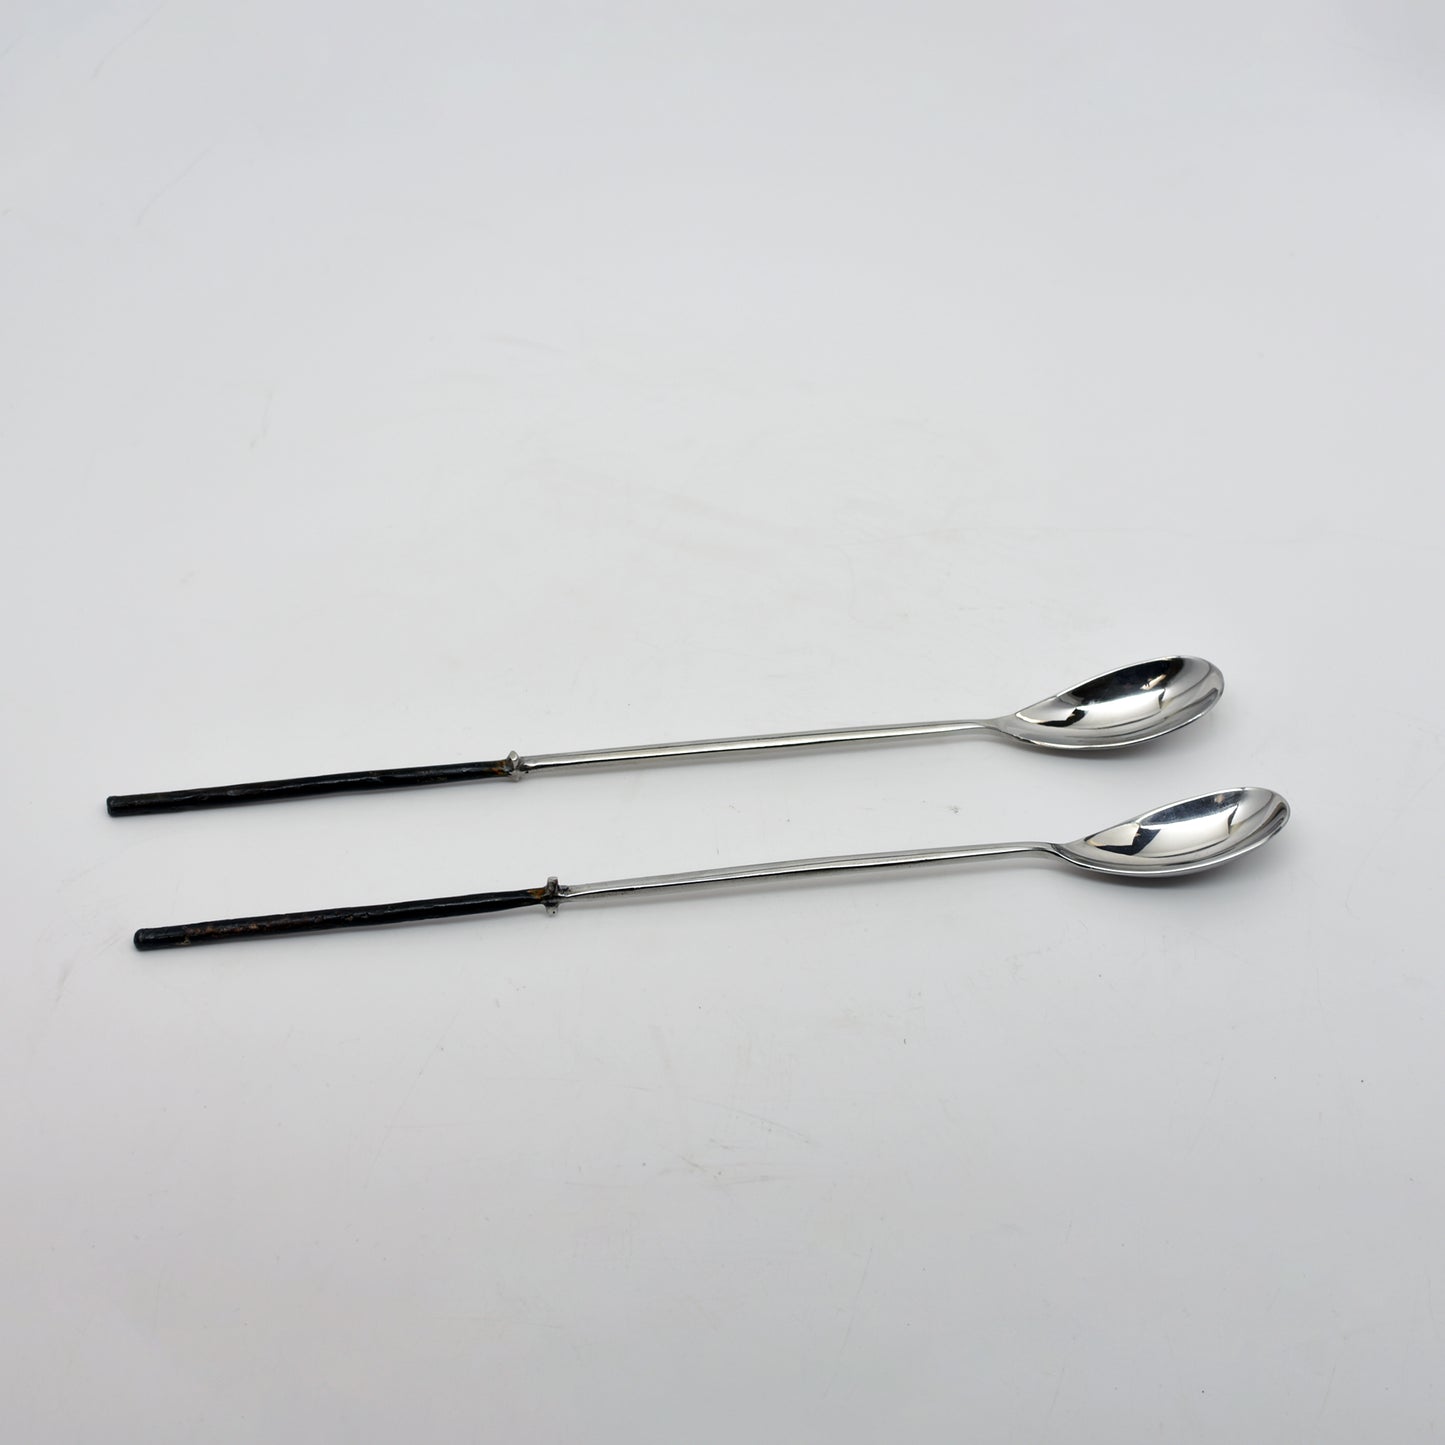 Cuchara Spoons With Iron Handle - Set of 2